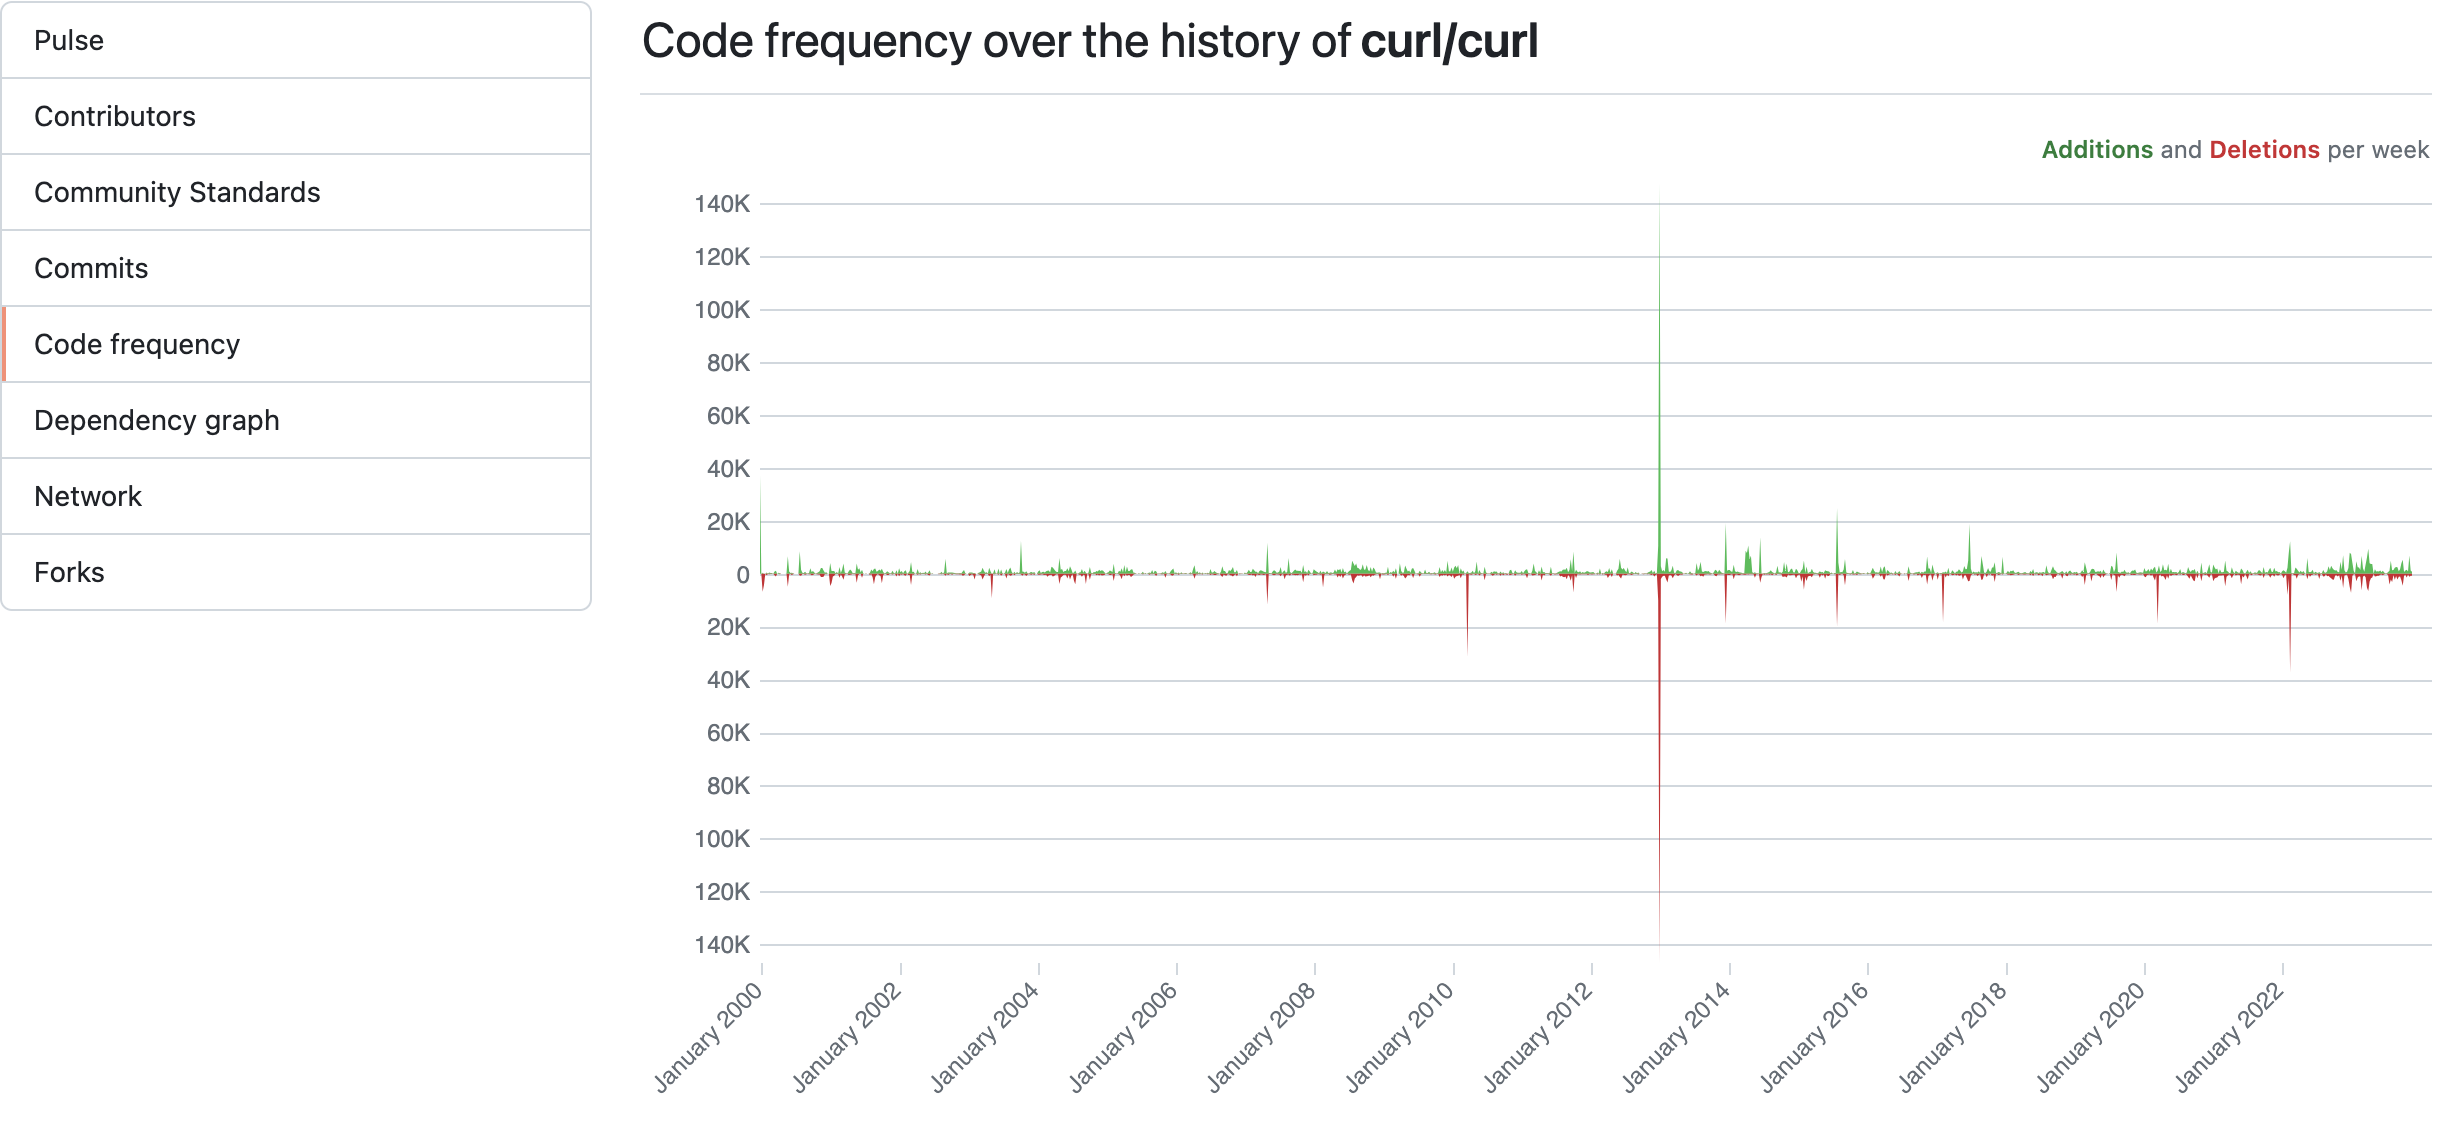 The current Insights > Code Frequency tab which shows a graph of additions and deletions over time